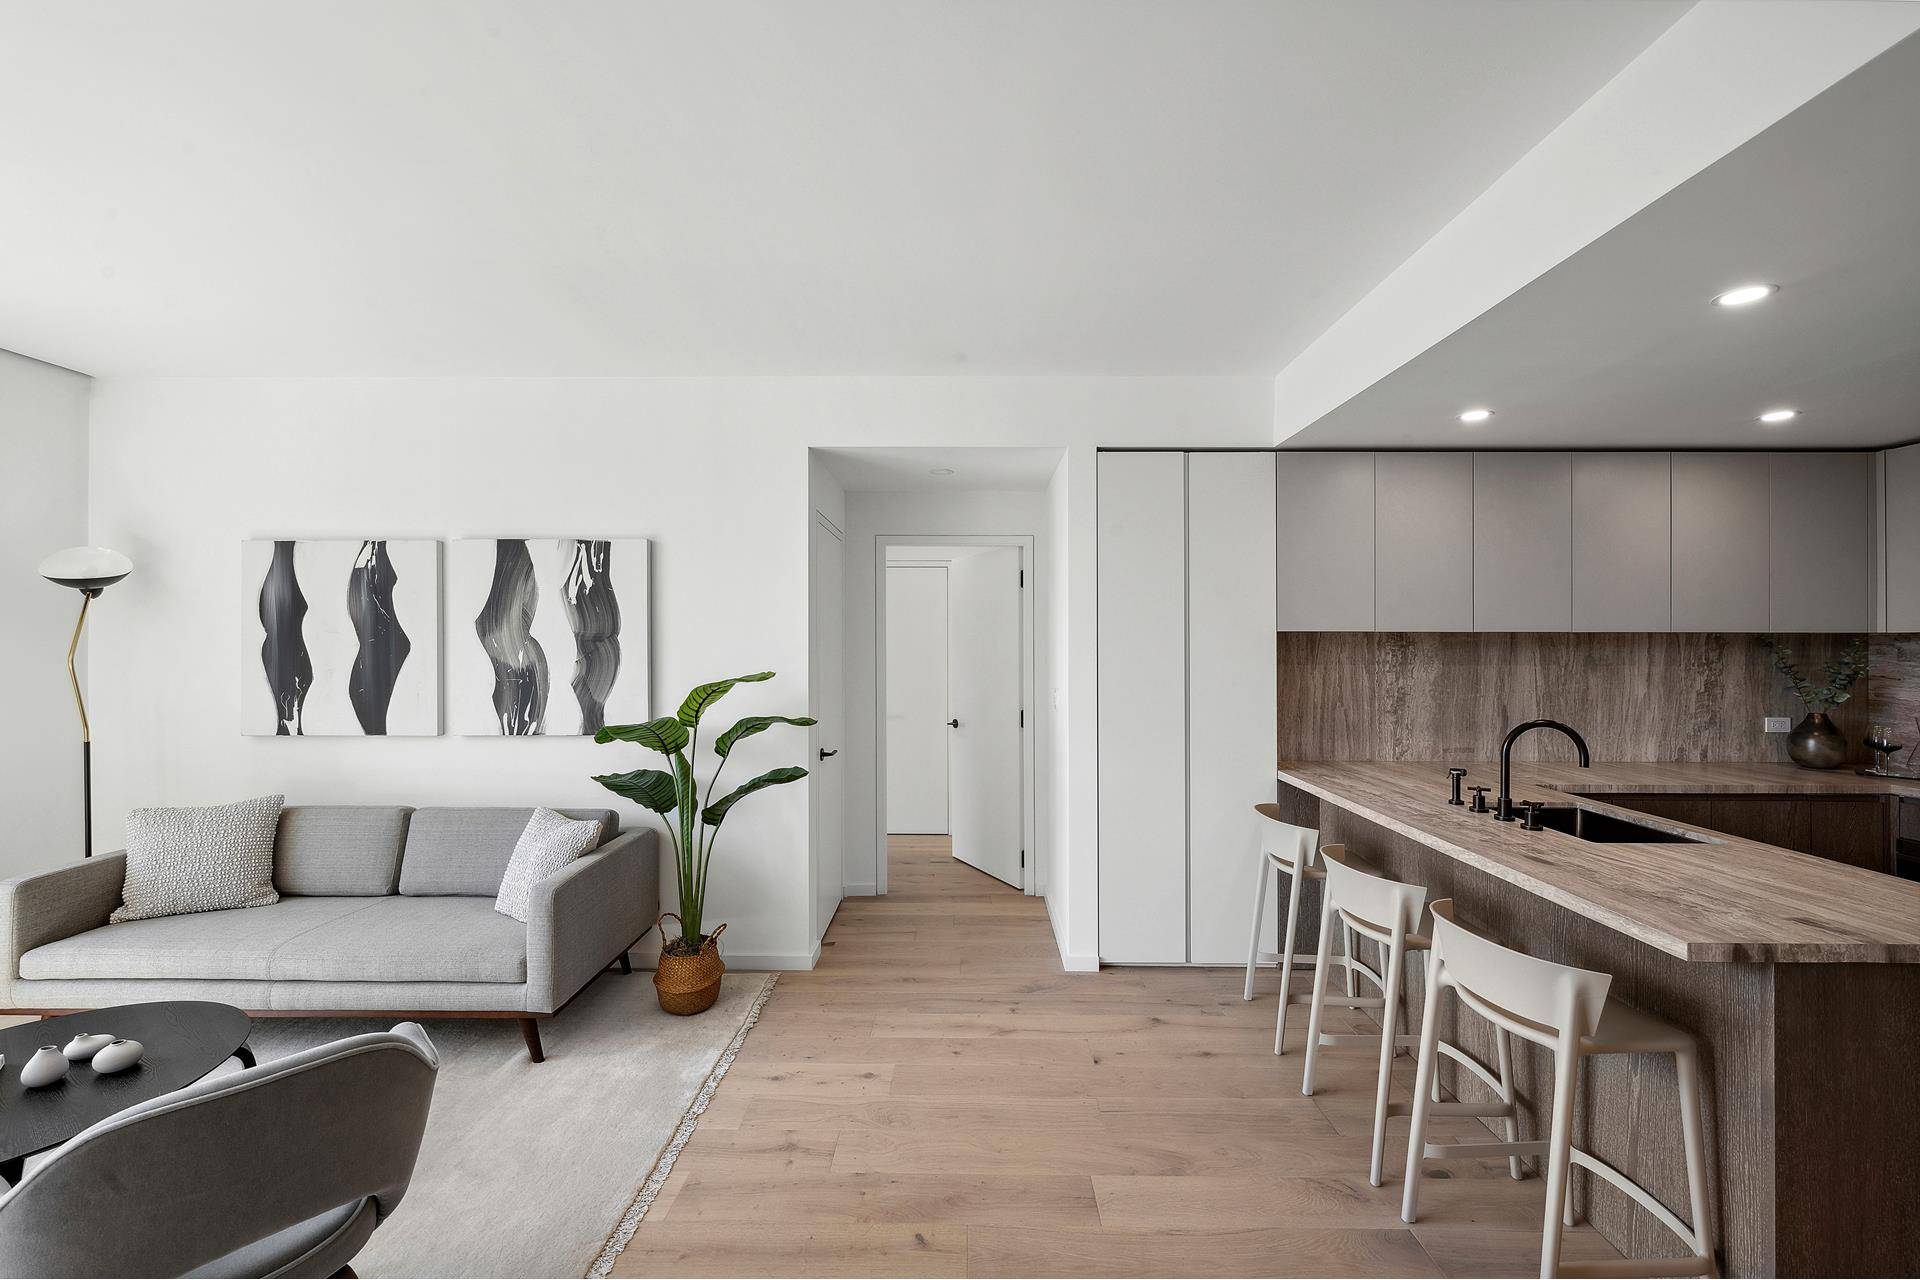 Presenting residence 4B a 975 SF 1 bedroom 2 bathroom residence designed by TalliTien.